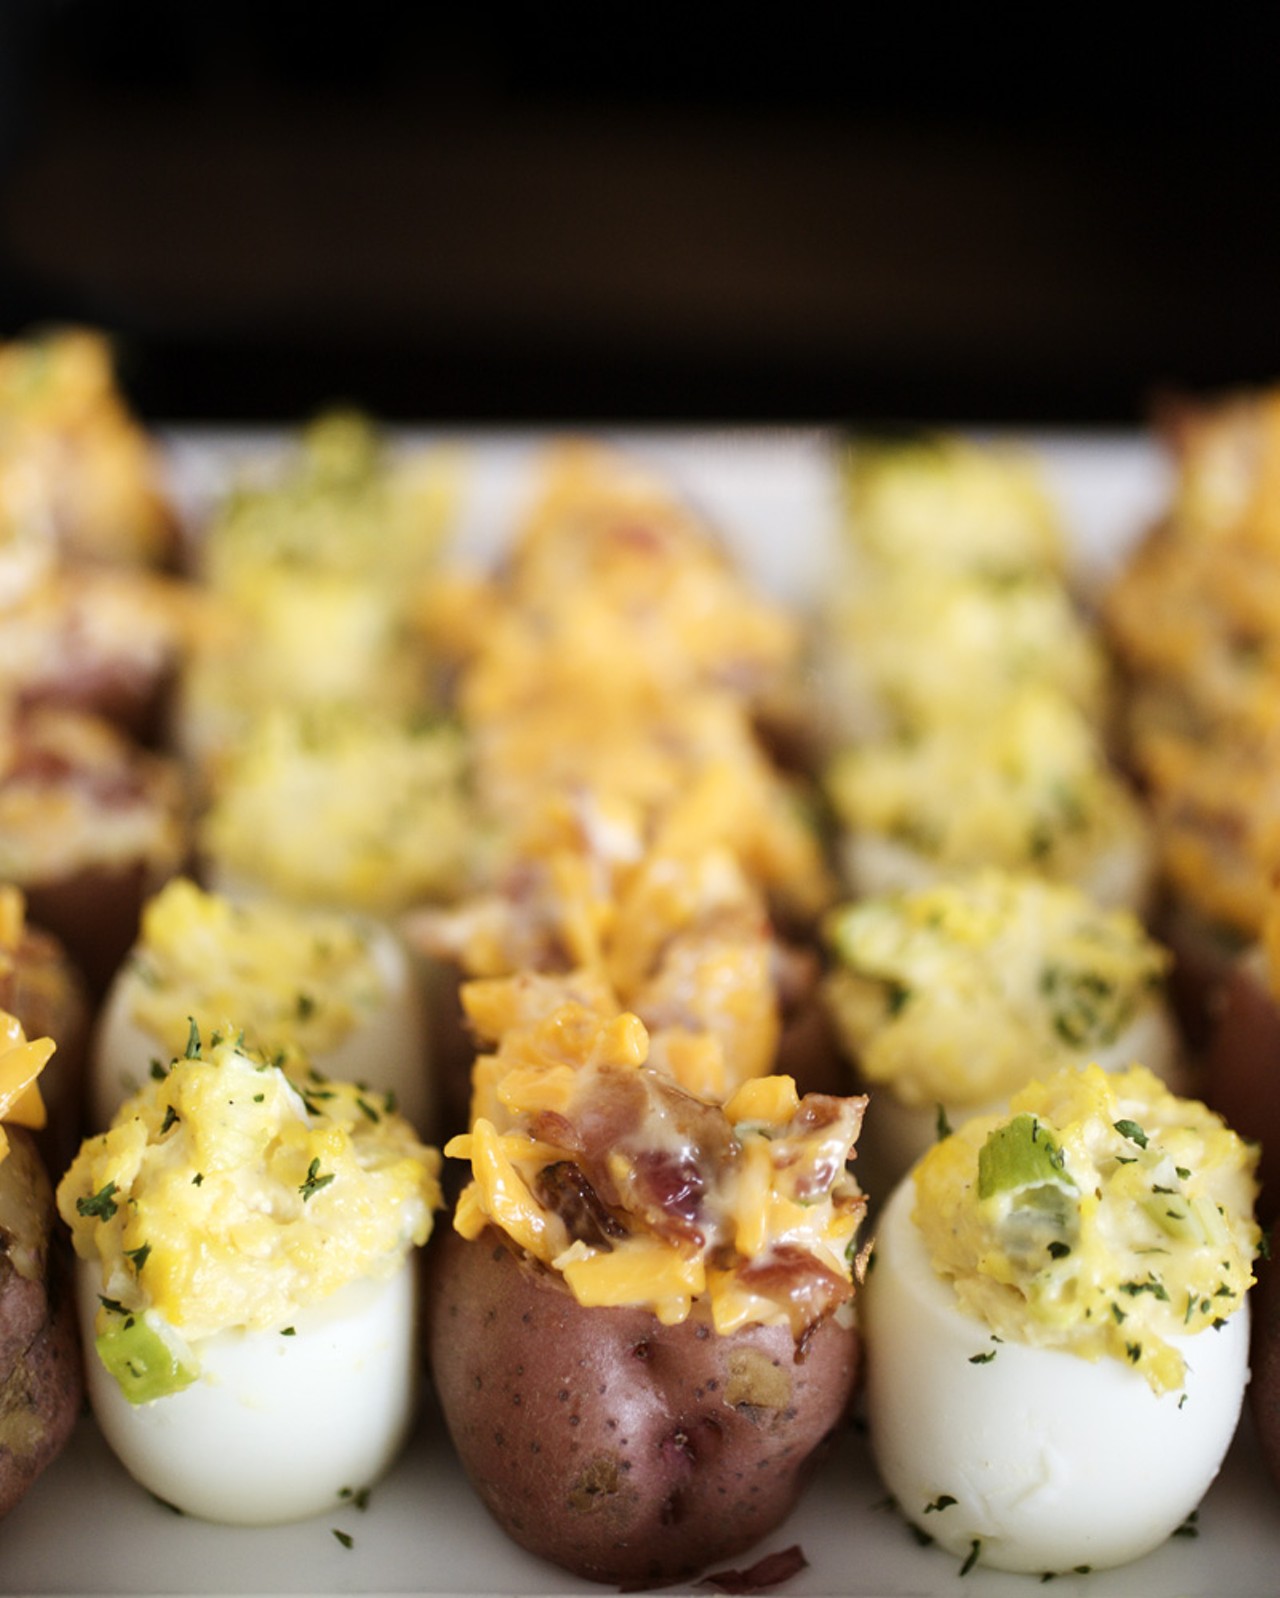 Also found on the buffet were lines of deviled eggs and red potatoes stuffed with cheddar, bacon and scallions.